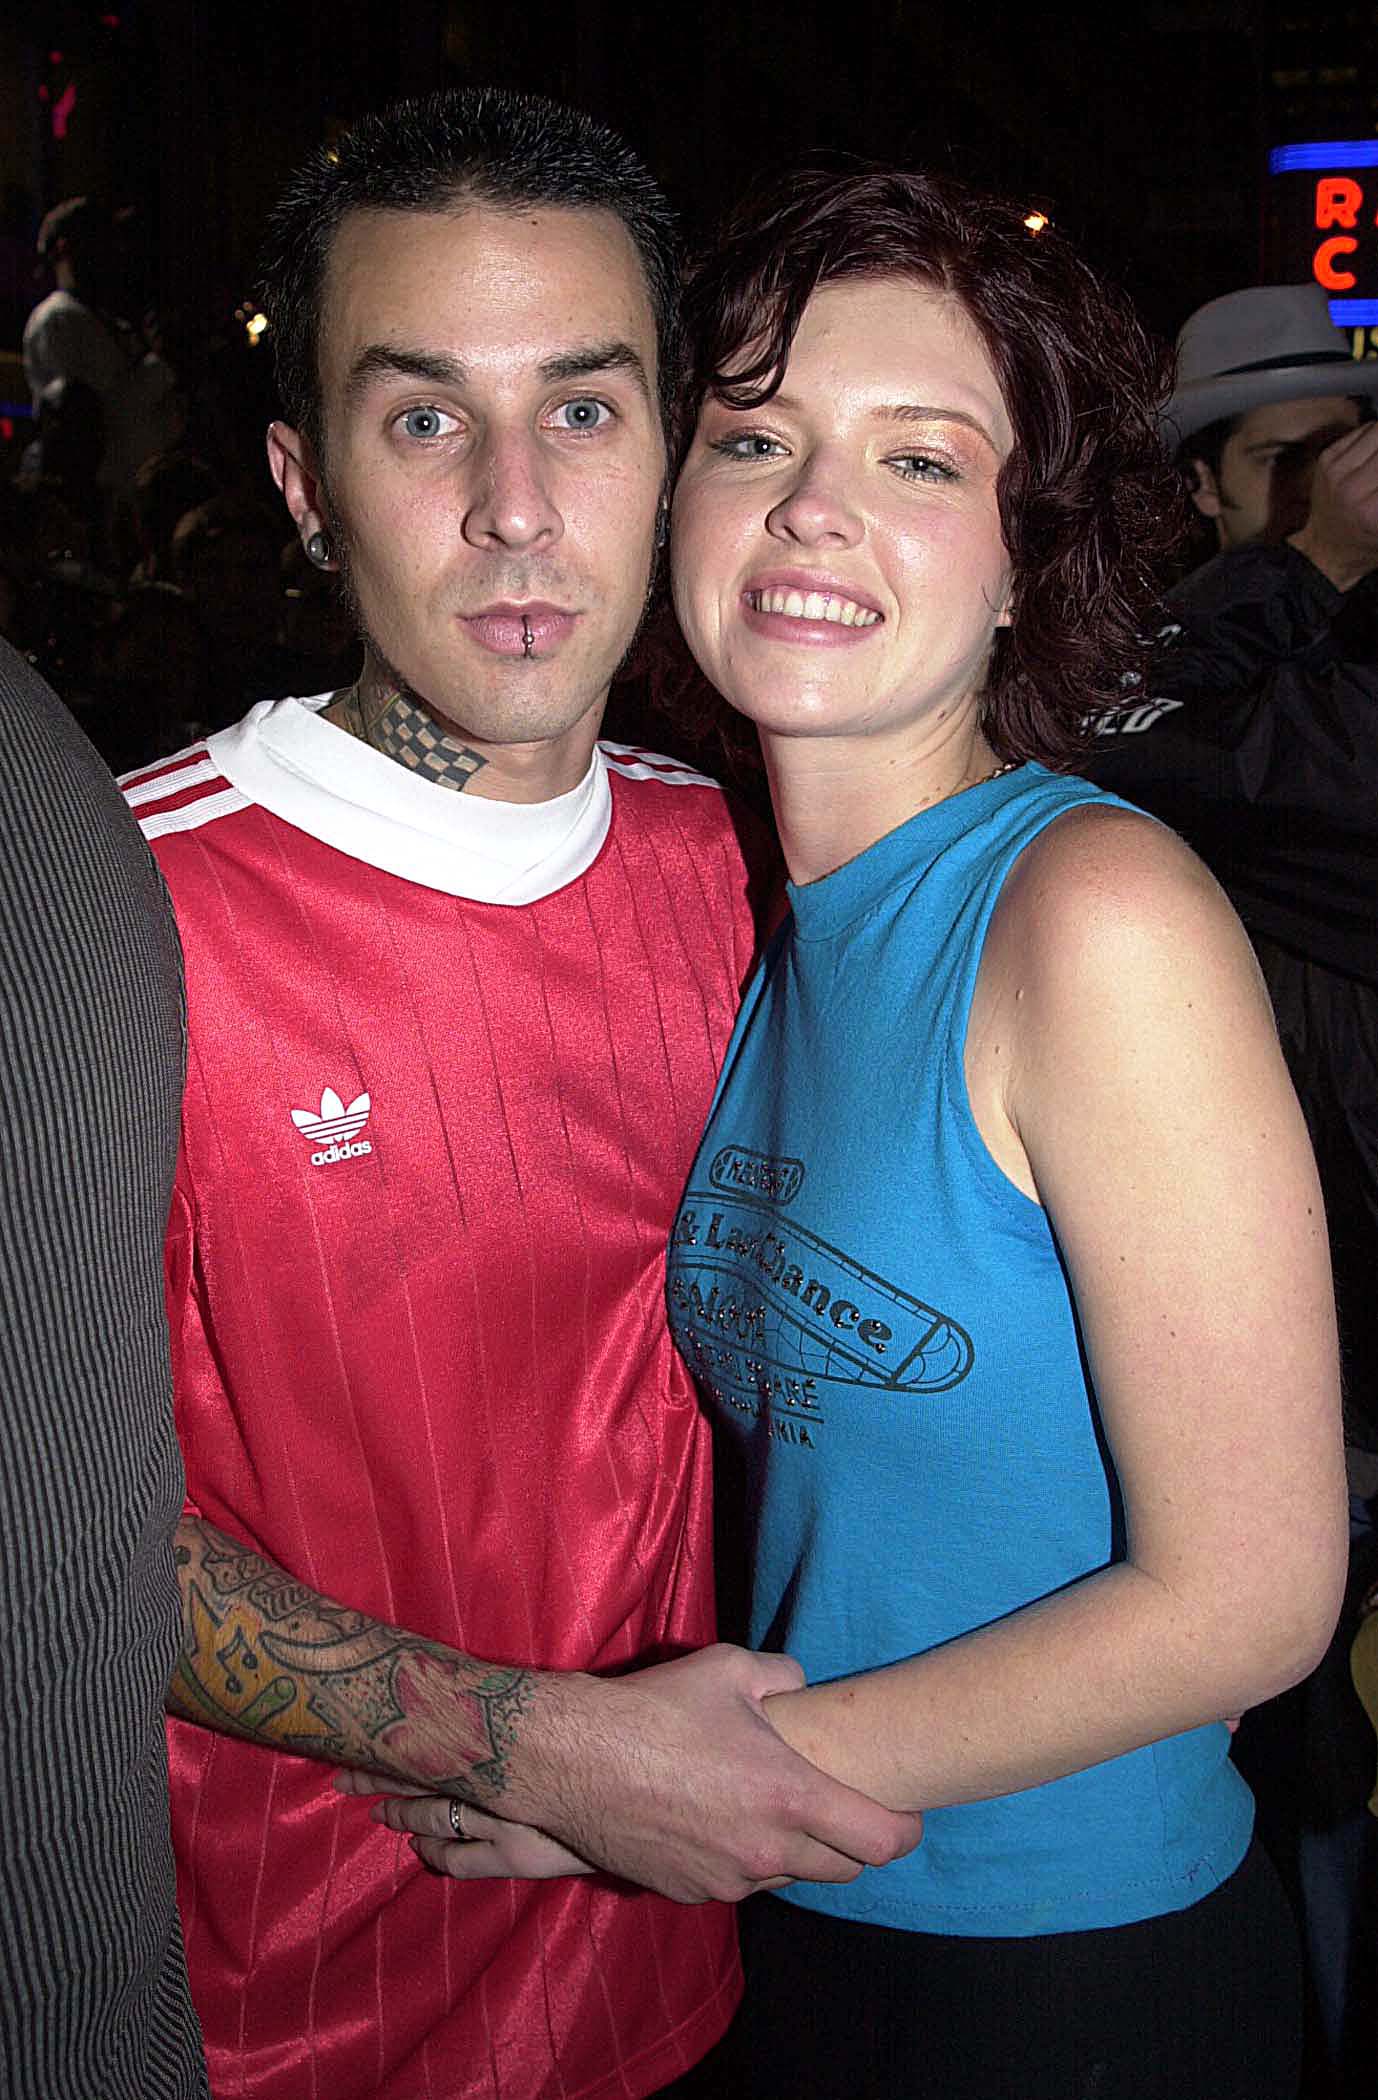 Travis Barker of Blink-182 and his date during 2000 MTV Video Music Awards in New York City. | Source: Getty Images